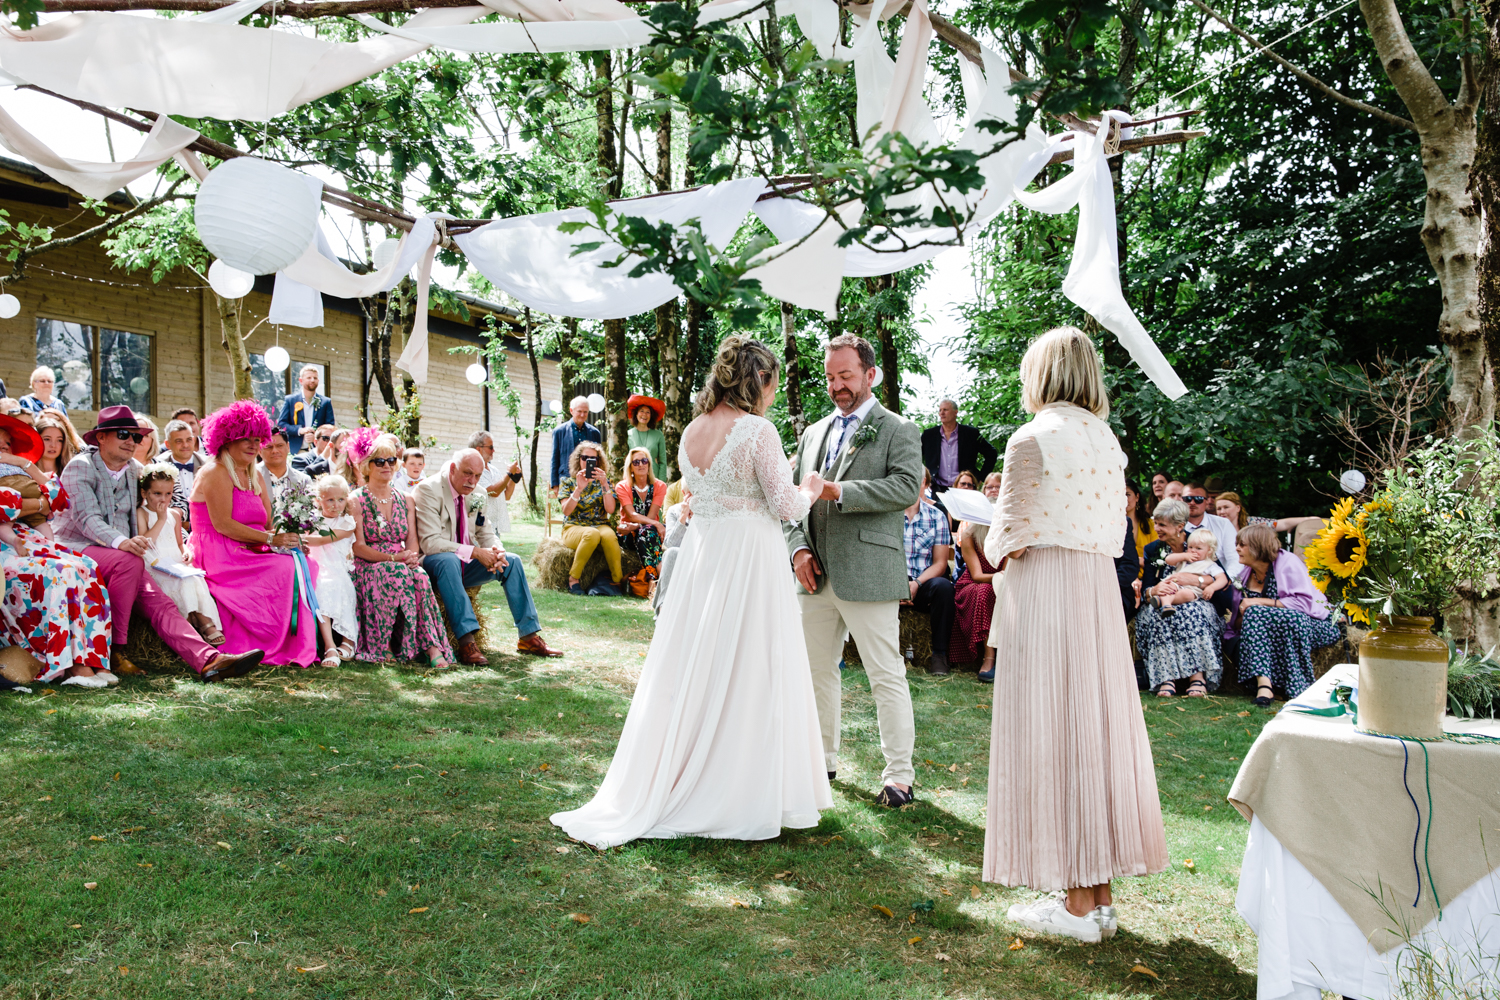 humanist wedding ceremony taking place in a woodland setting at Holsome Park, Devon